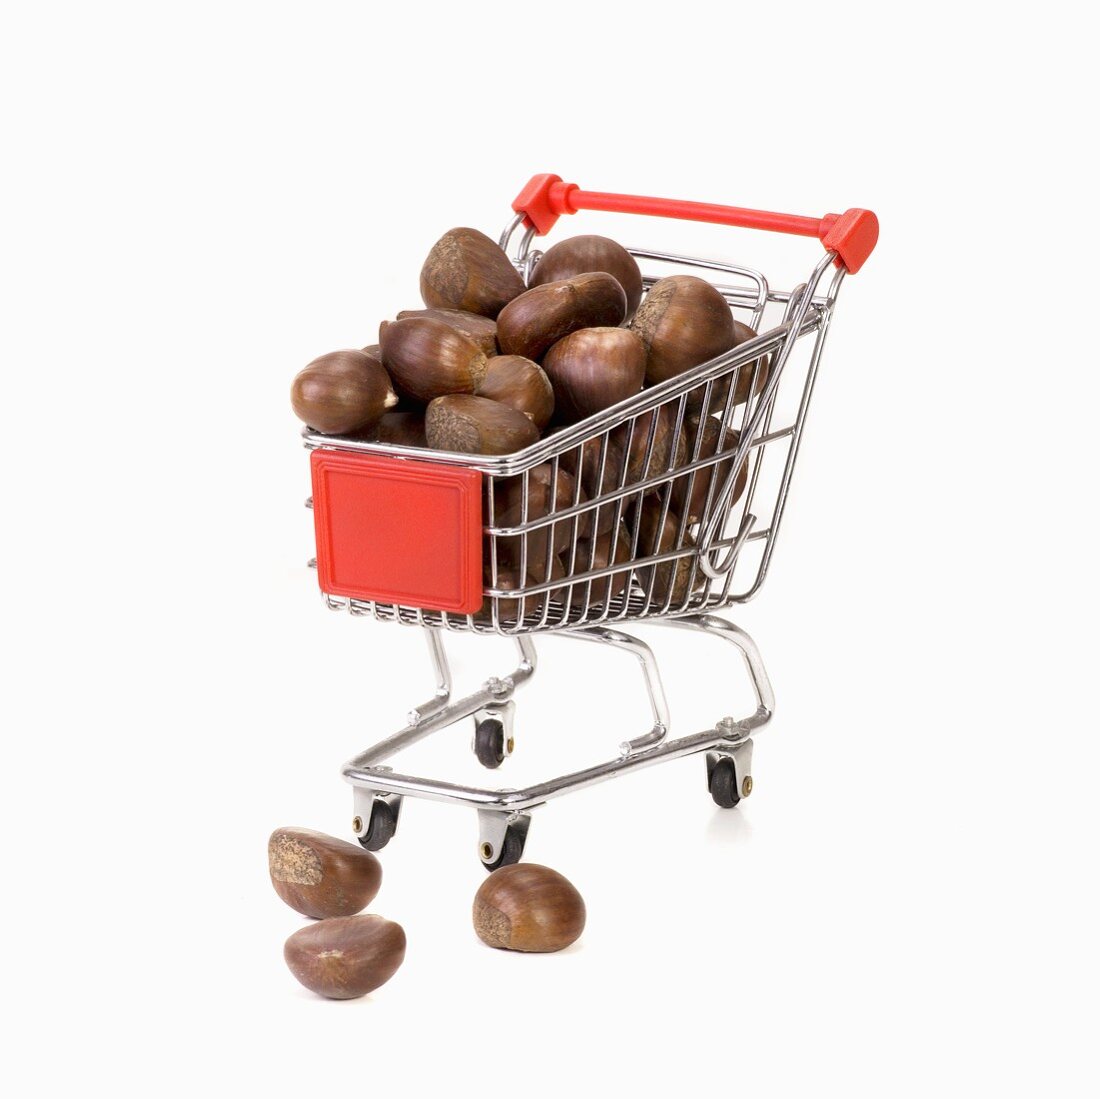 Toy shopping trolley full of chestnuts